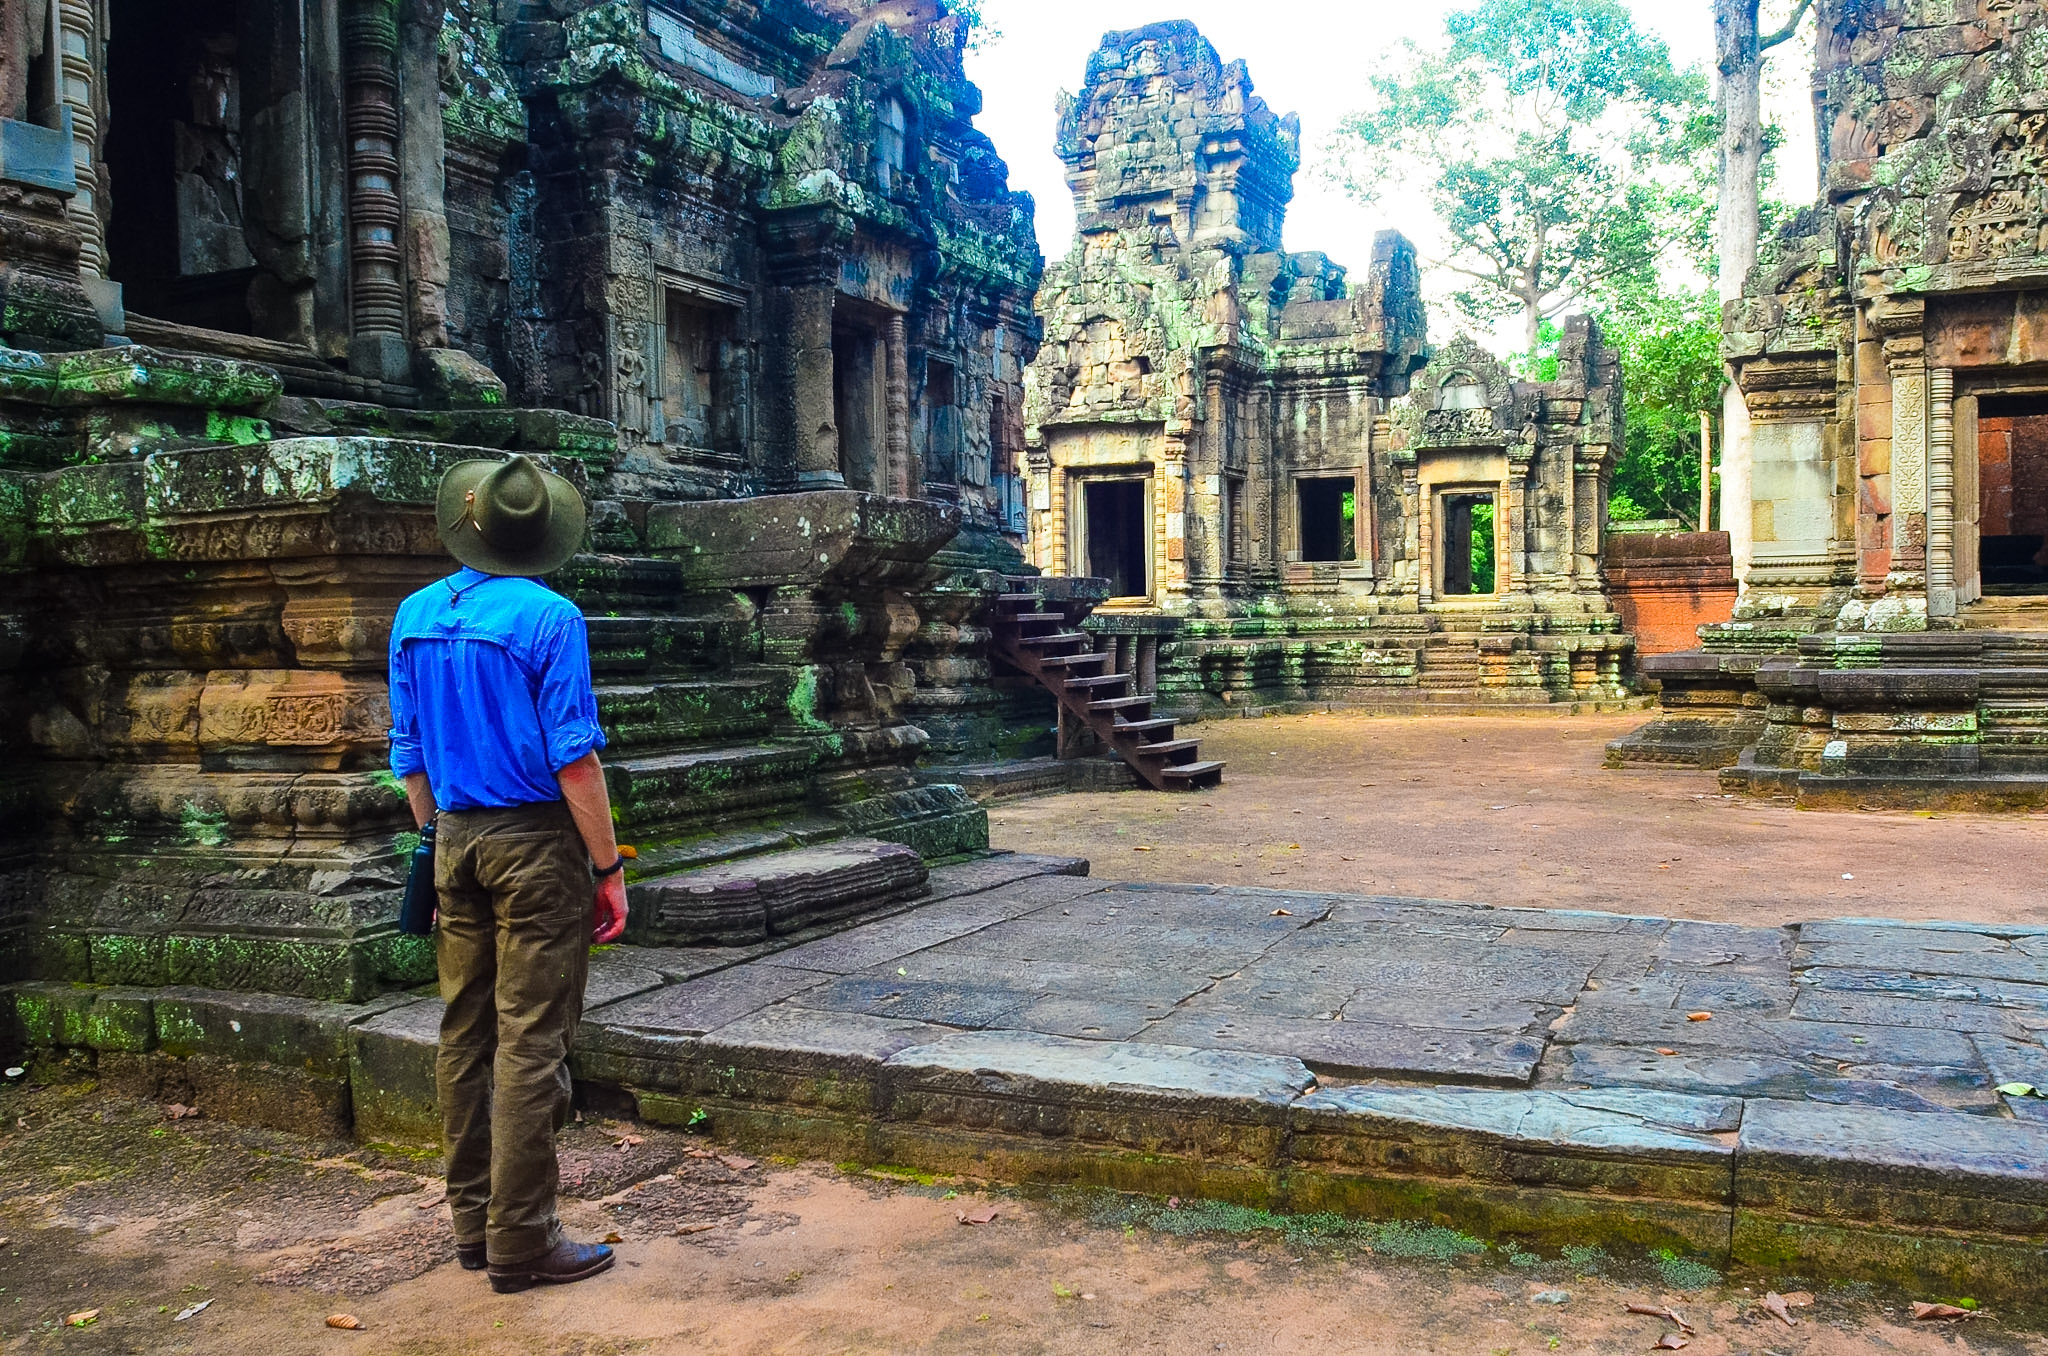 Add Angkor, Cambodia, to your bucket list!